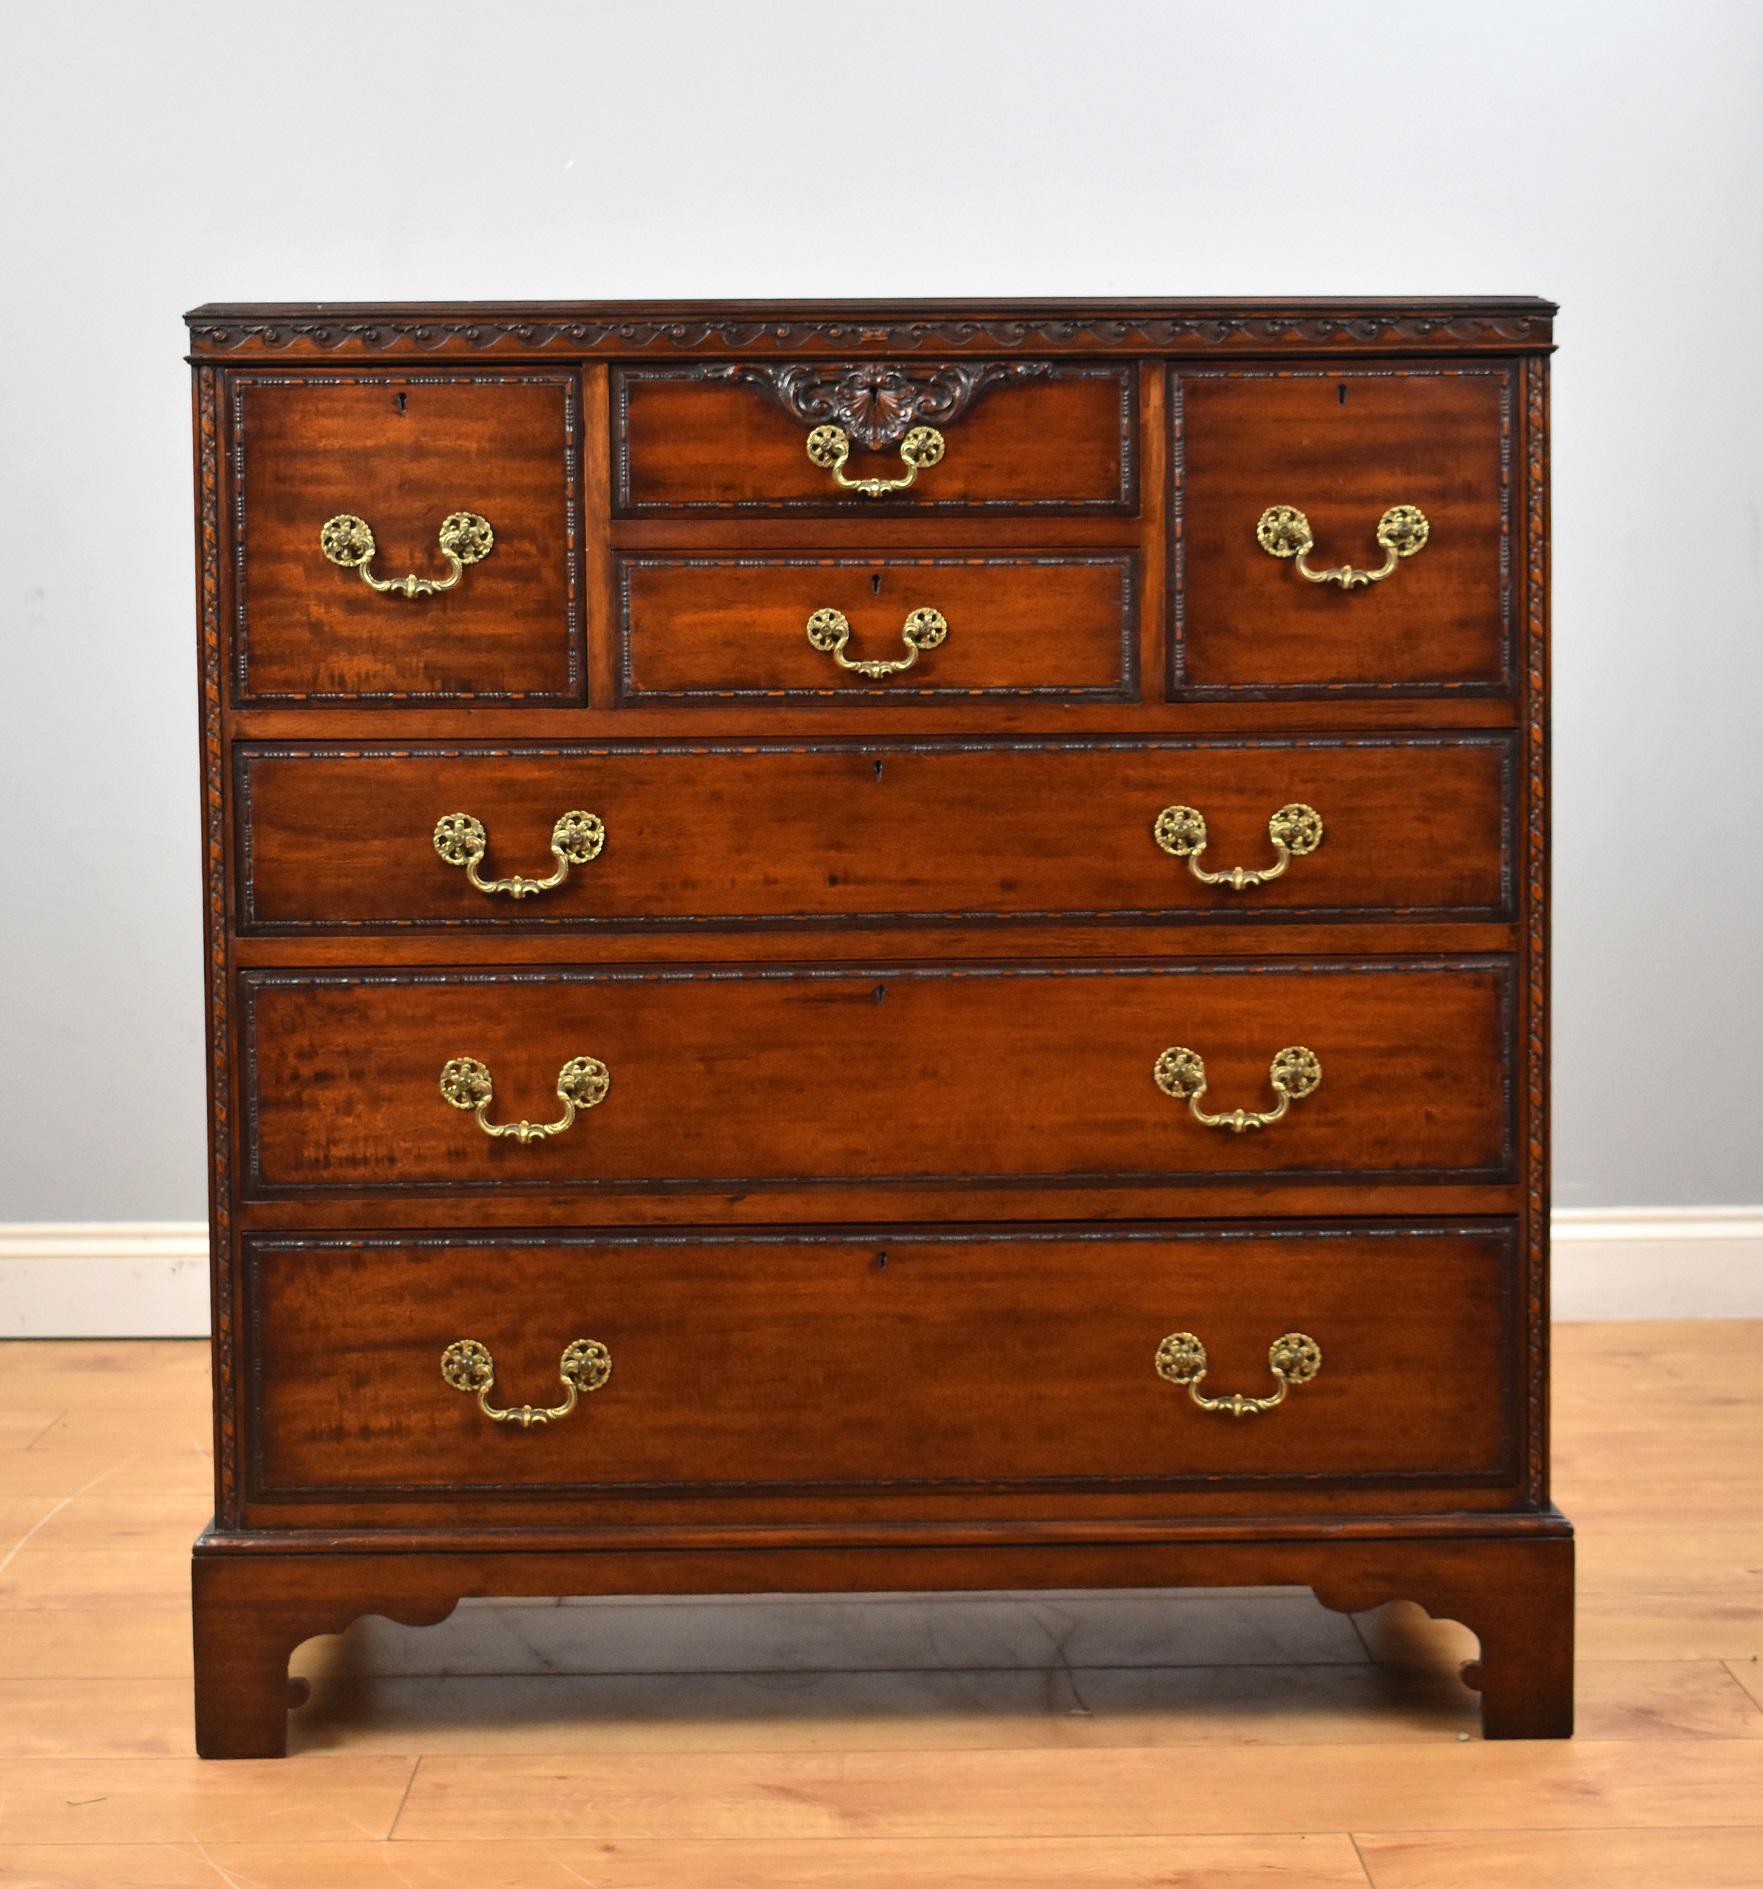 Waring and gillow mahogany chest drawers in good condition having been polished by hand. The chest has four drawers to the top and three long drawers below all with decorative brass handles and stands on bracket feet. Makers label in top drawer.